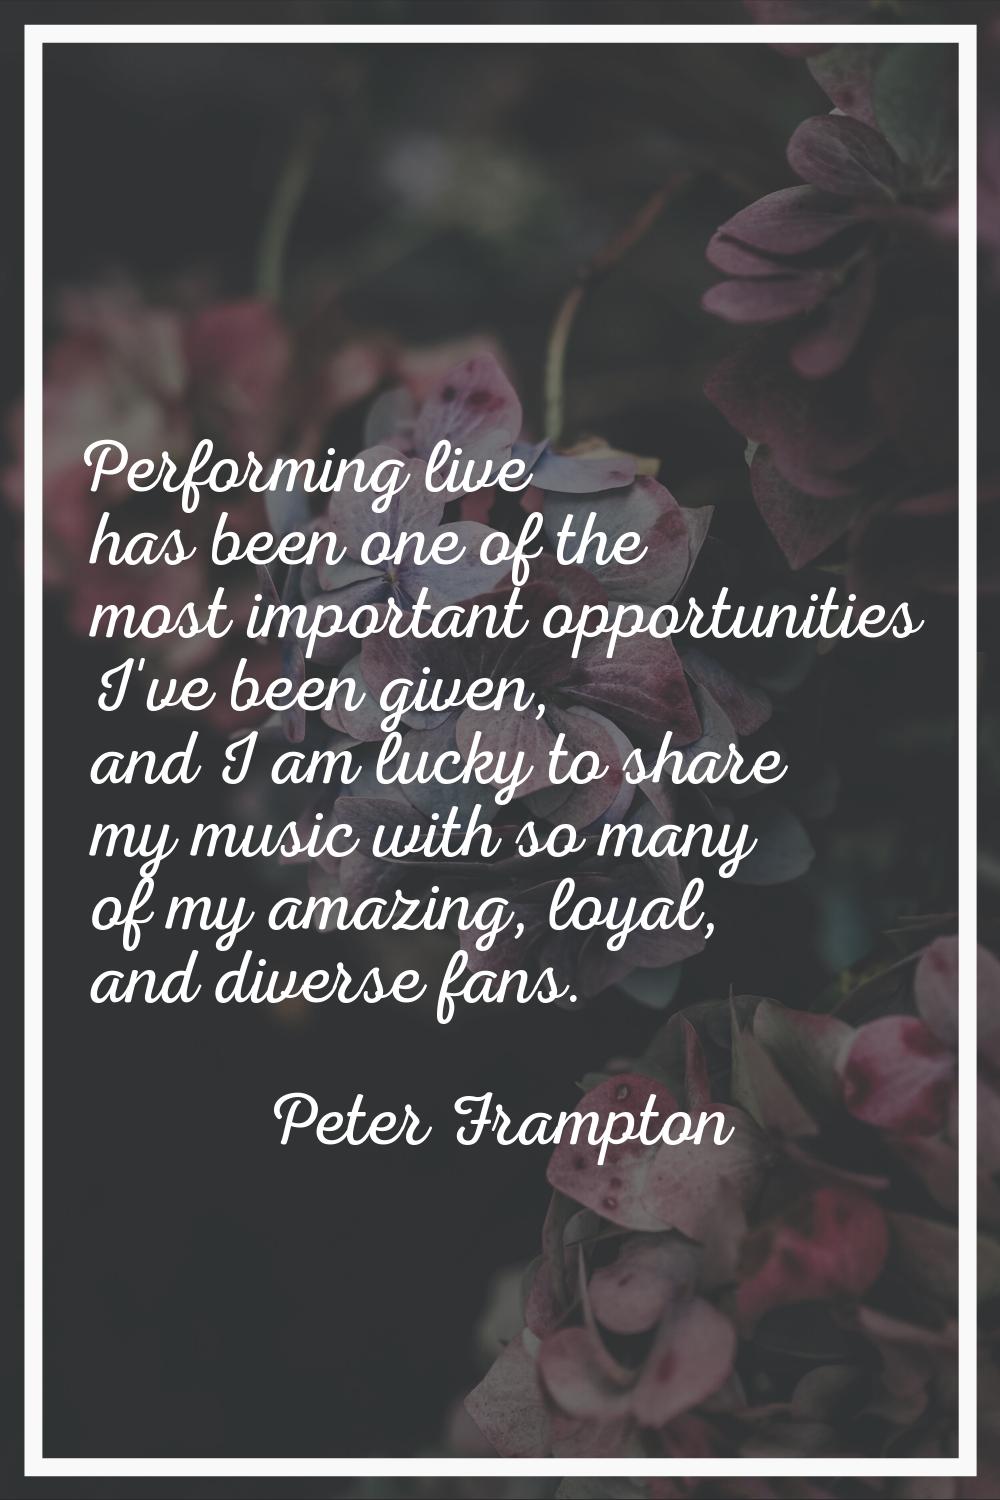 Performing live has been one of the most important opportunities I've been given, and I am lucky to